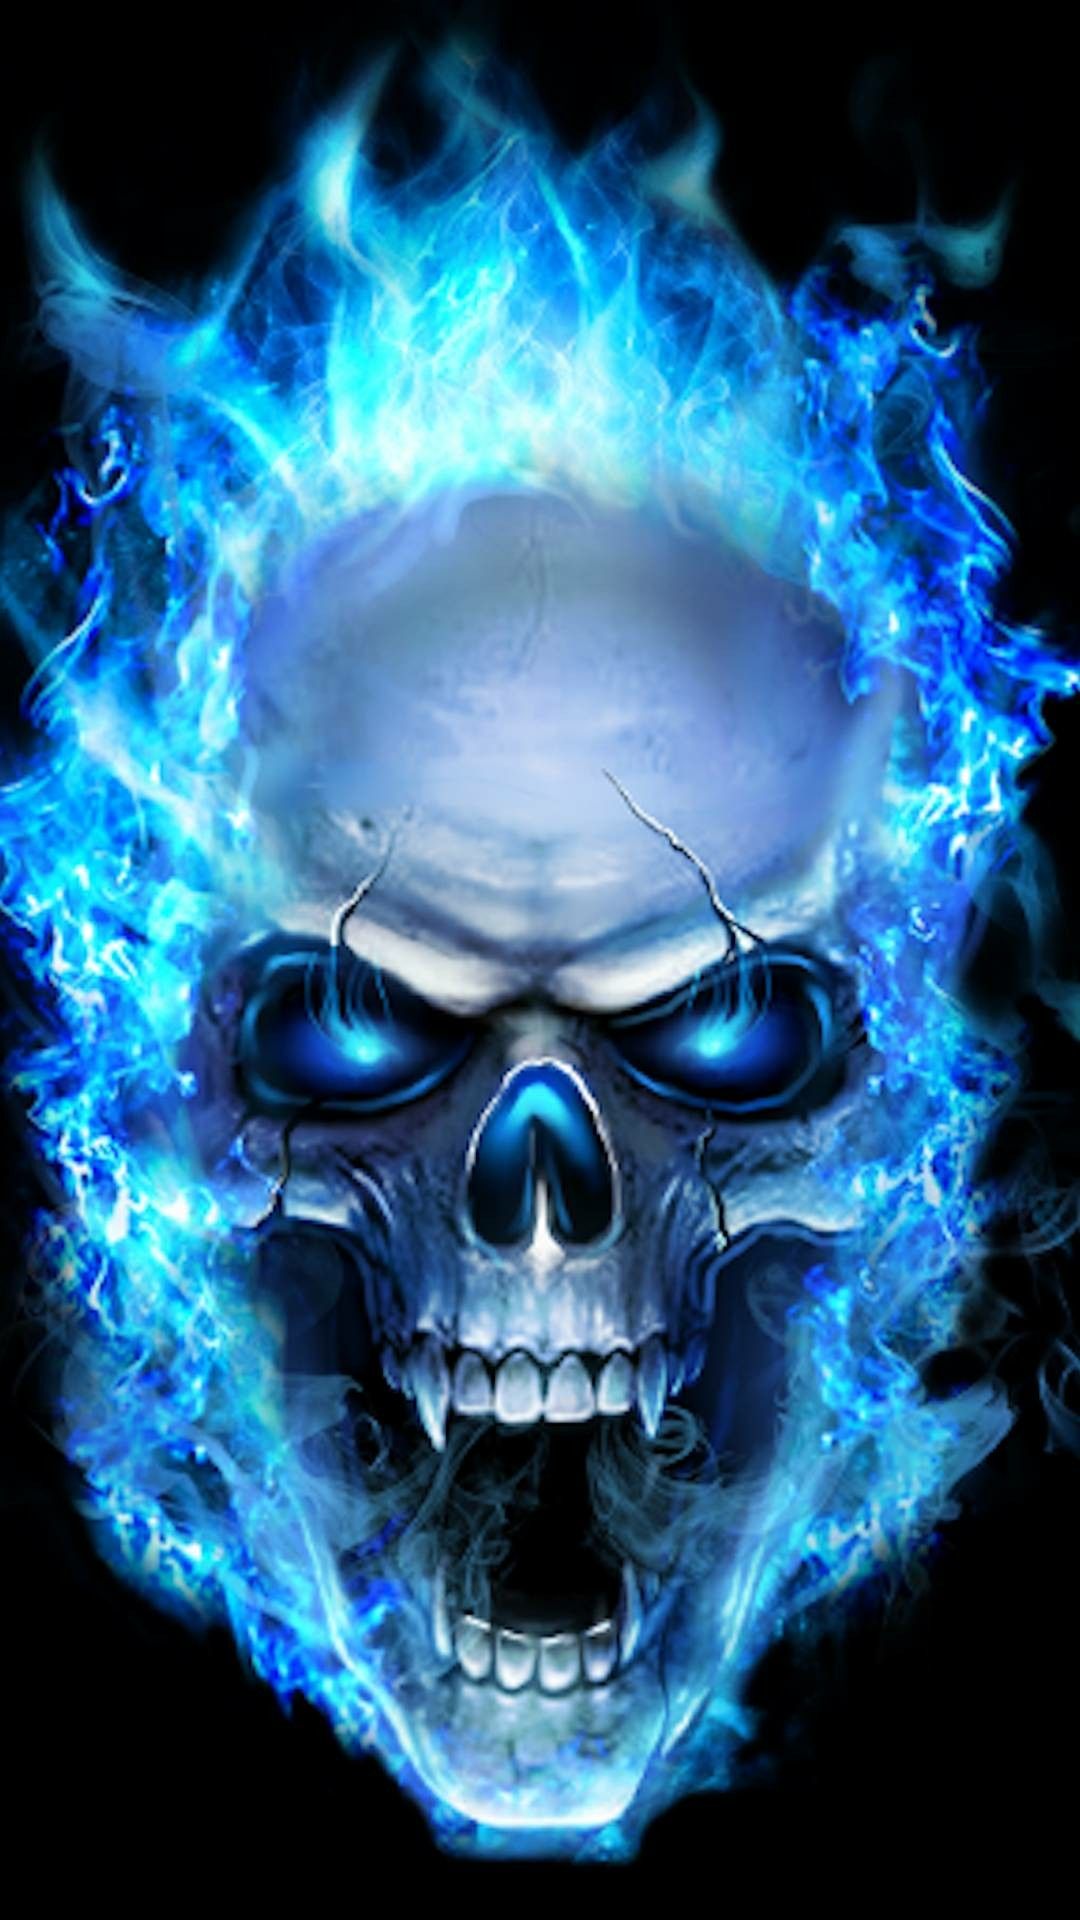 Cool Pictures For Wallpaper - NawPic 3d Skull Wallpaper Hd